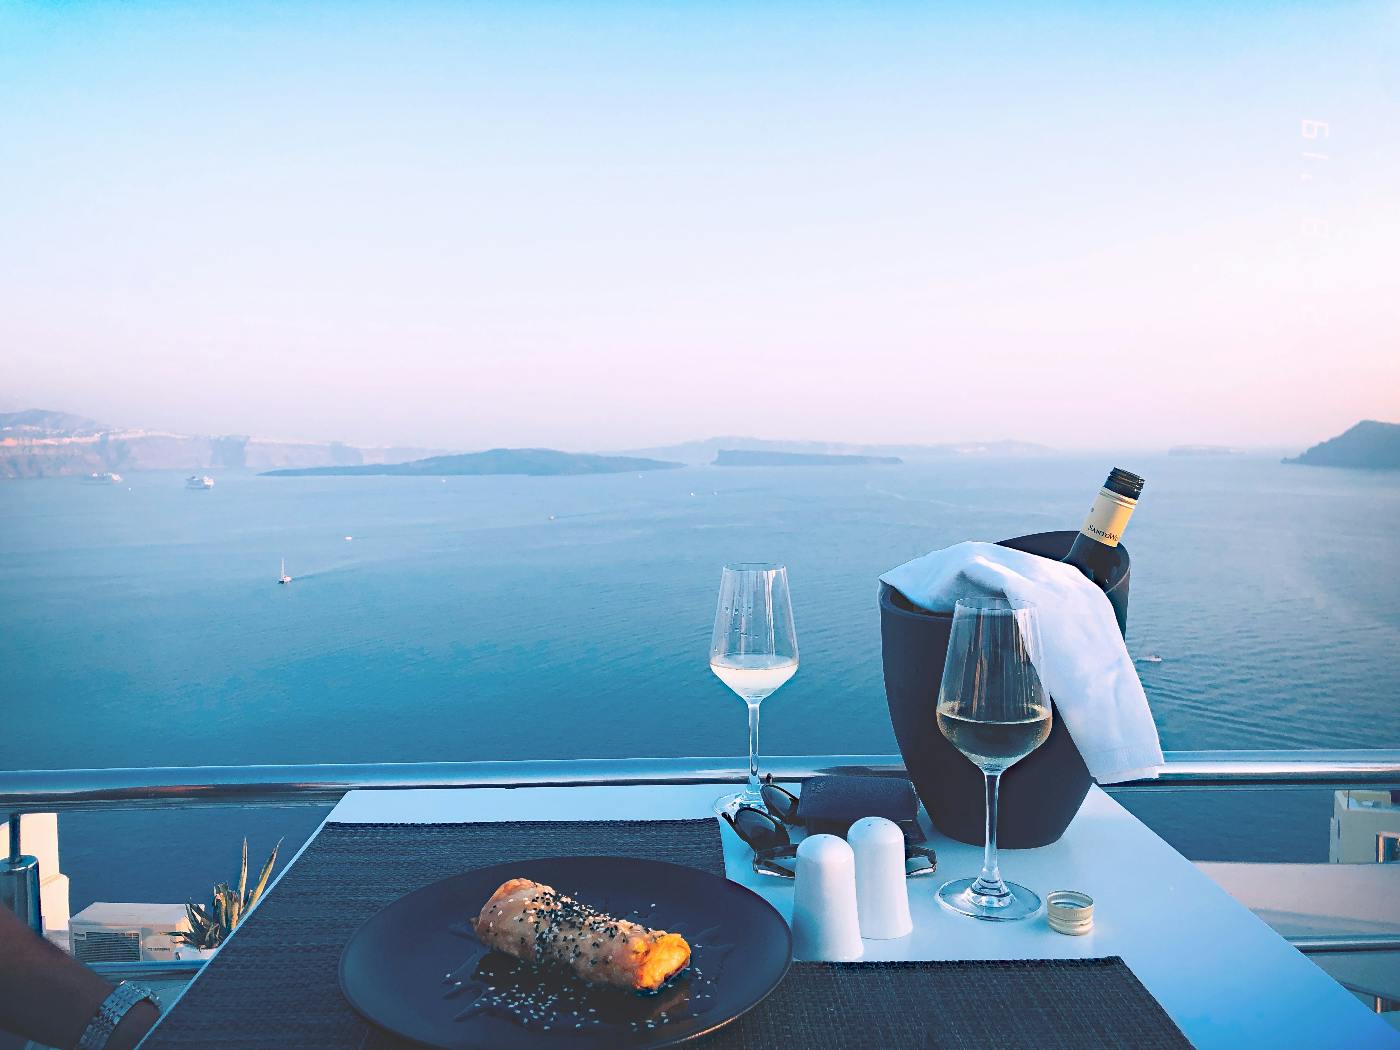 A table set for dinner, two wine glasses a bottle in wine bucket overlooking the ocean